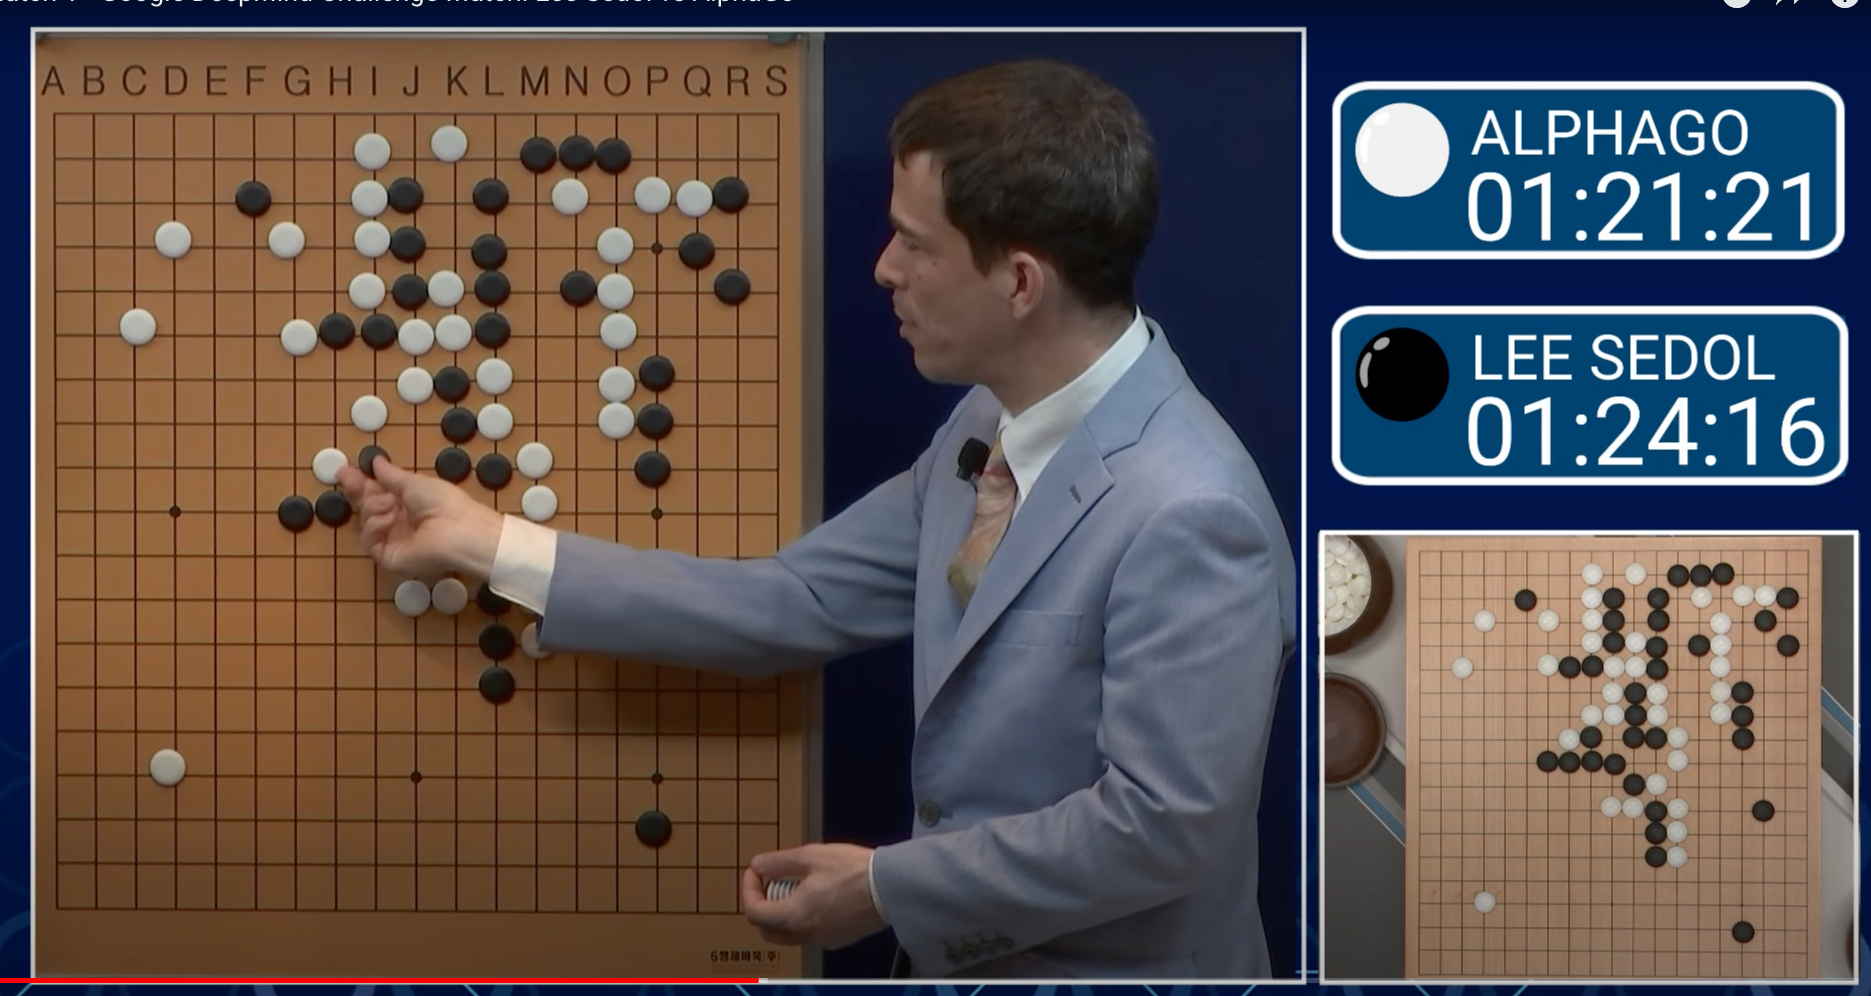 Using machine learning, AlphaGo taught itself the game of Go, and in 2016 beat 18-time world champion Lee Sedol. Pictured here is Go professional Michael Redmond providing a play-by-play commentary on the AlphaGo/Sedol match. (DEEPMIND)